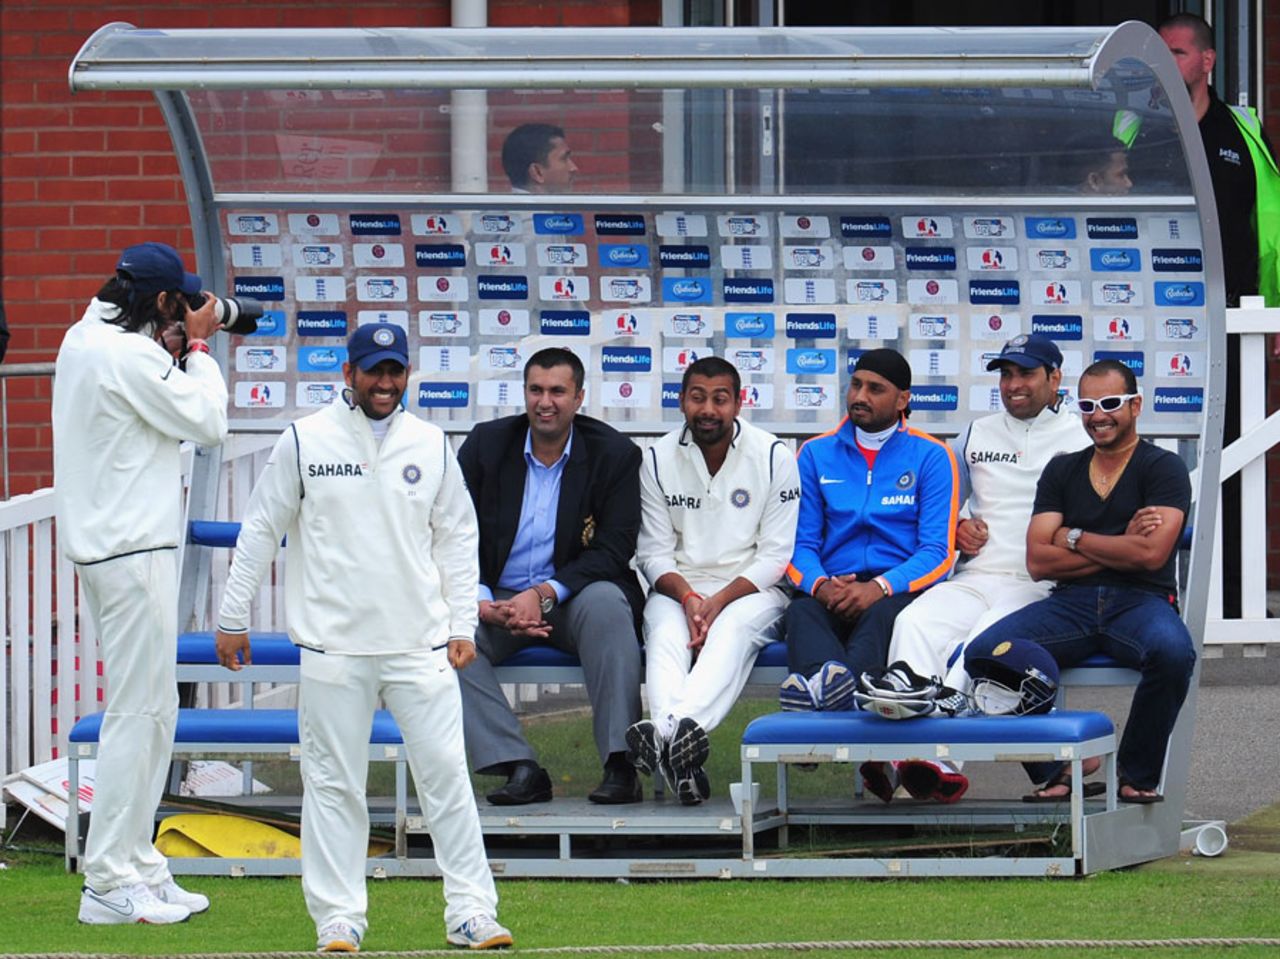 Ishant Sharma plays photographer to his team-mates, Somerset v Indians, Taunton, 2nd day, July 16, 2011